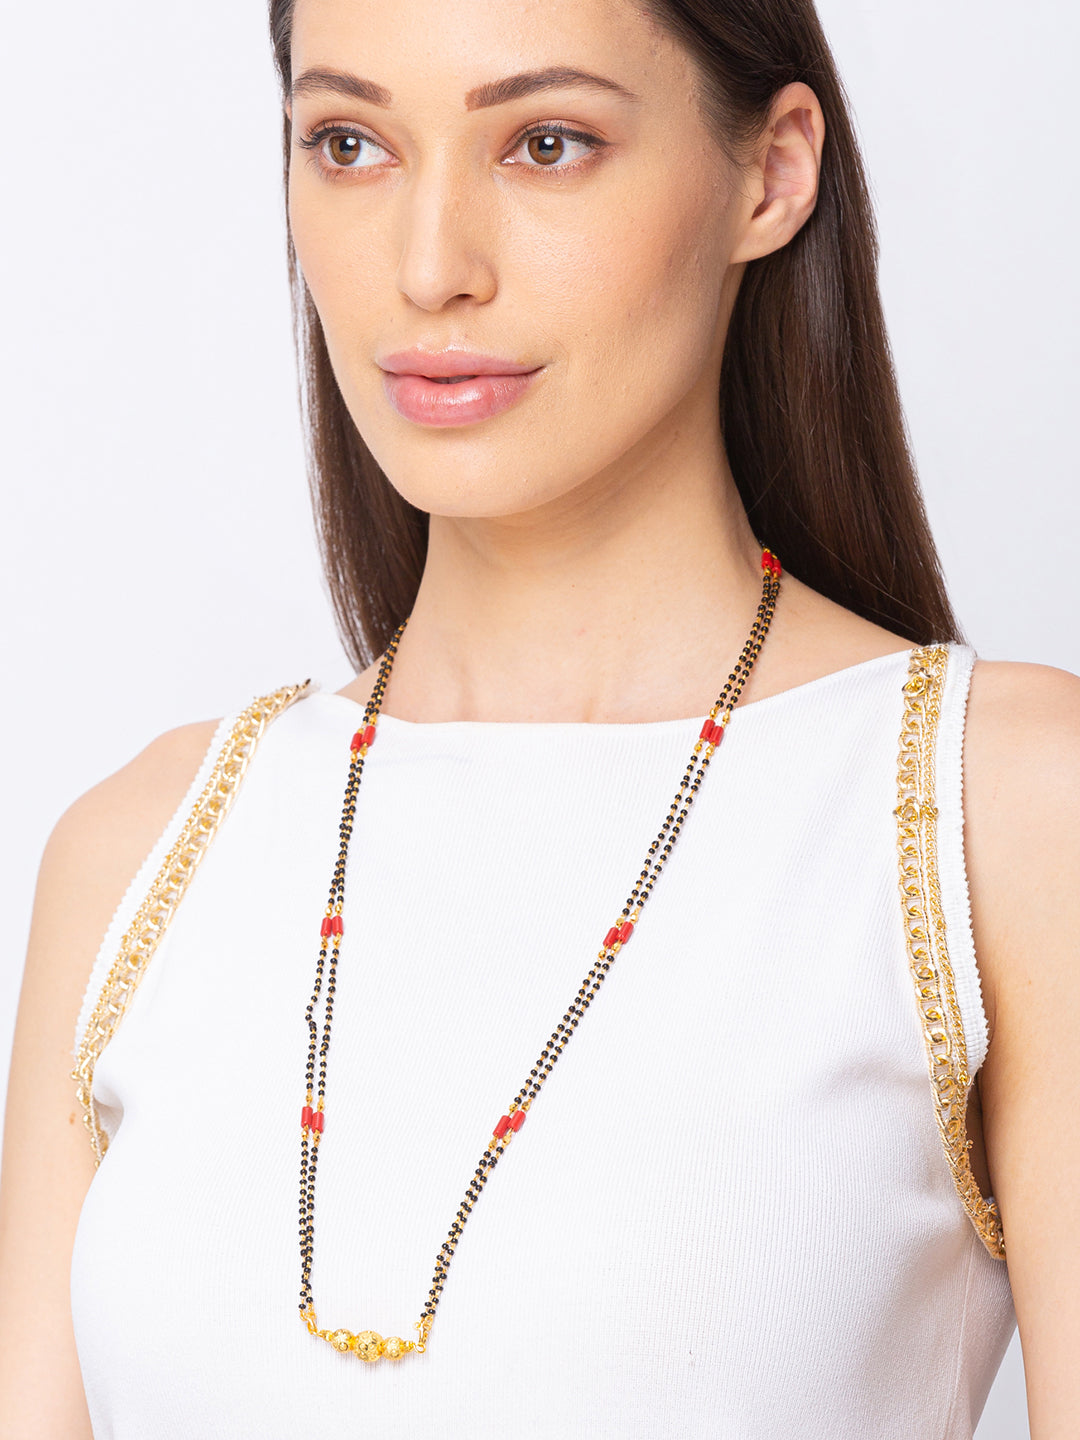 Digital Dress Room Digital Dress Room One Gram Gold Plated Long Mangalsutra मंगलसूत्र Latest Design Tanmaniya/Long Gold Chain/Black Red Beads New Mangalsutra Designs For Women (30 Inches) 